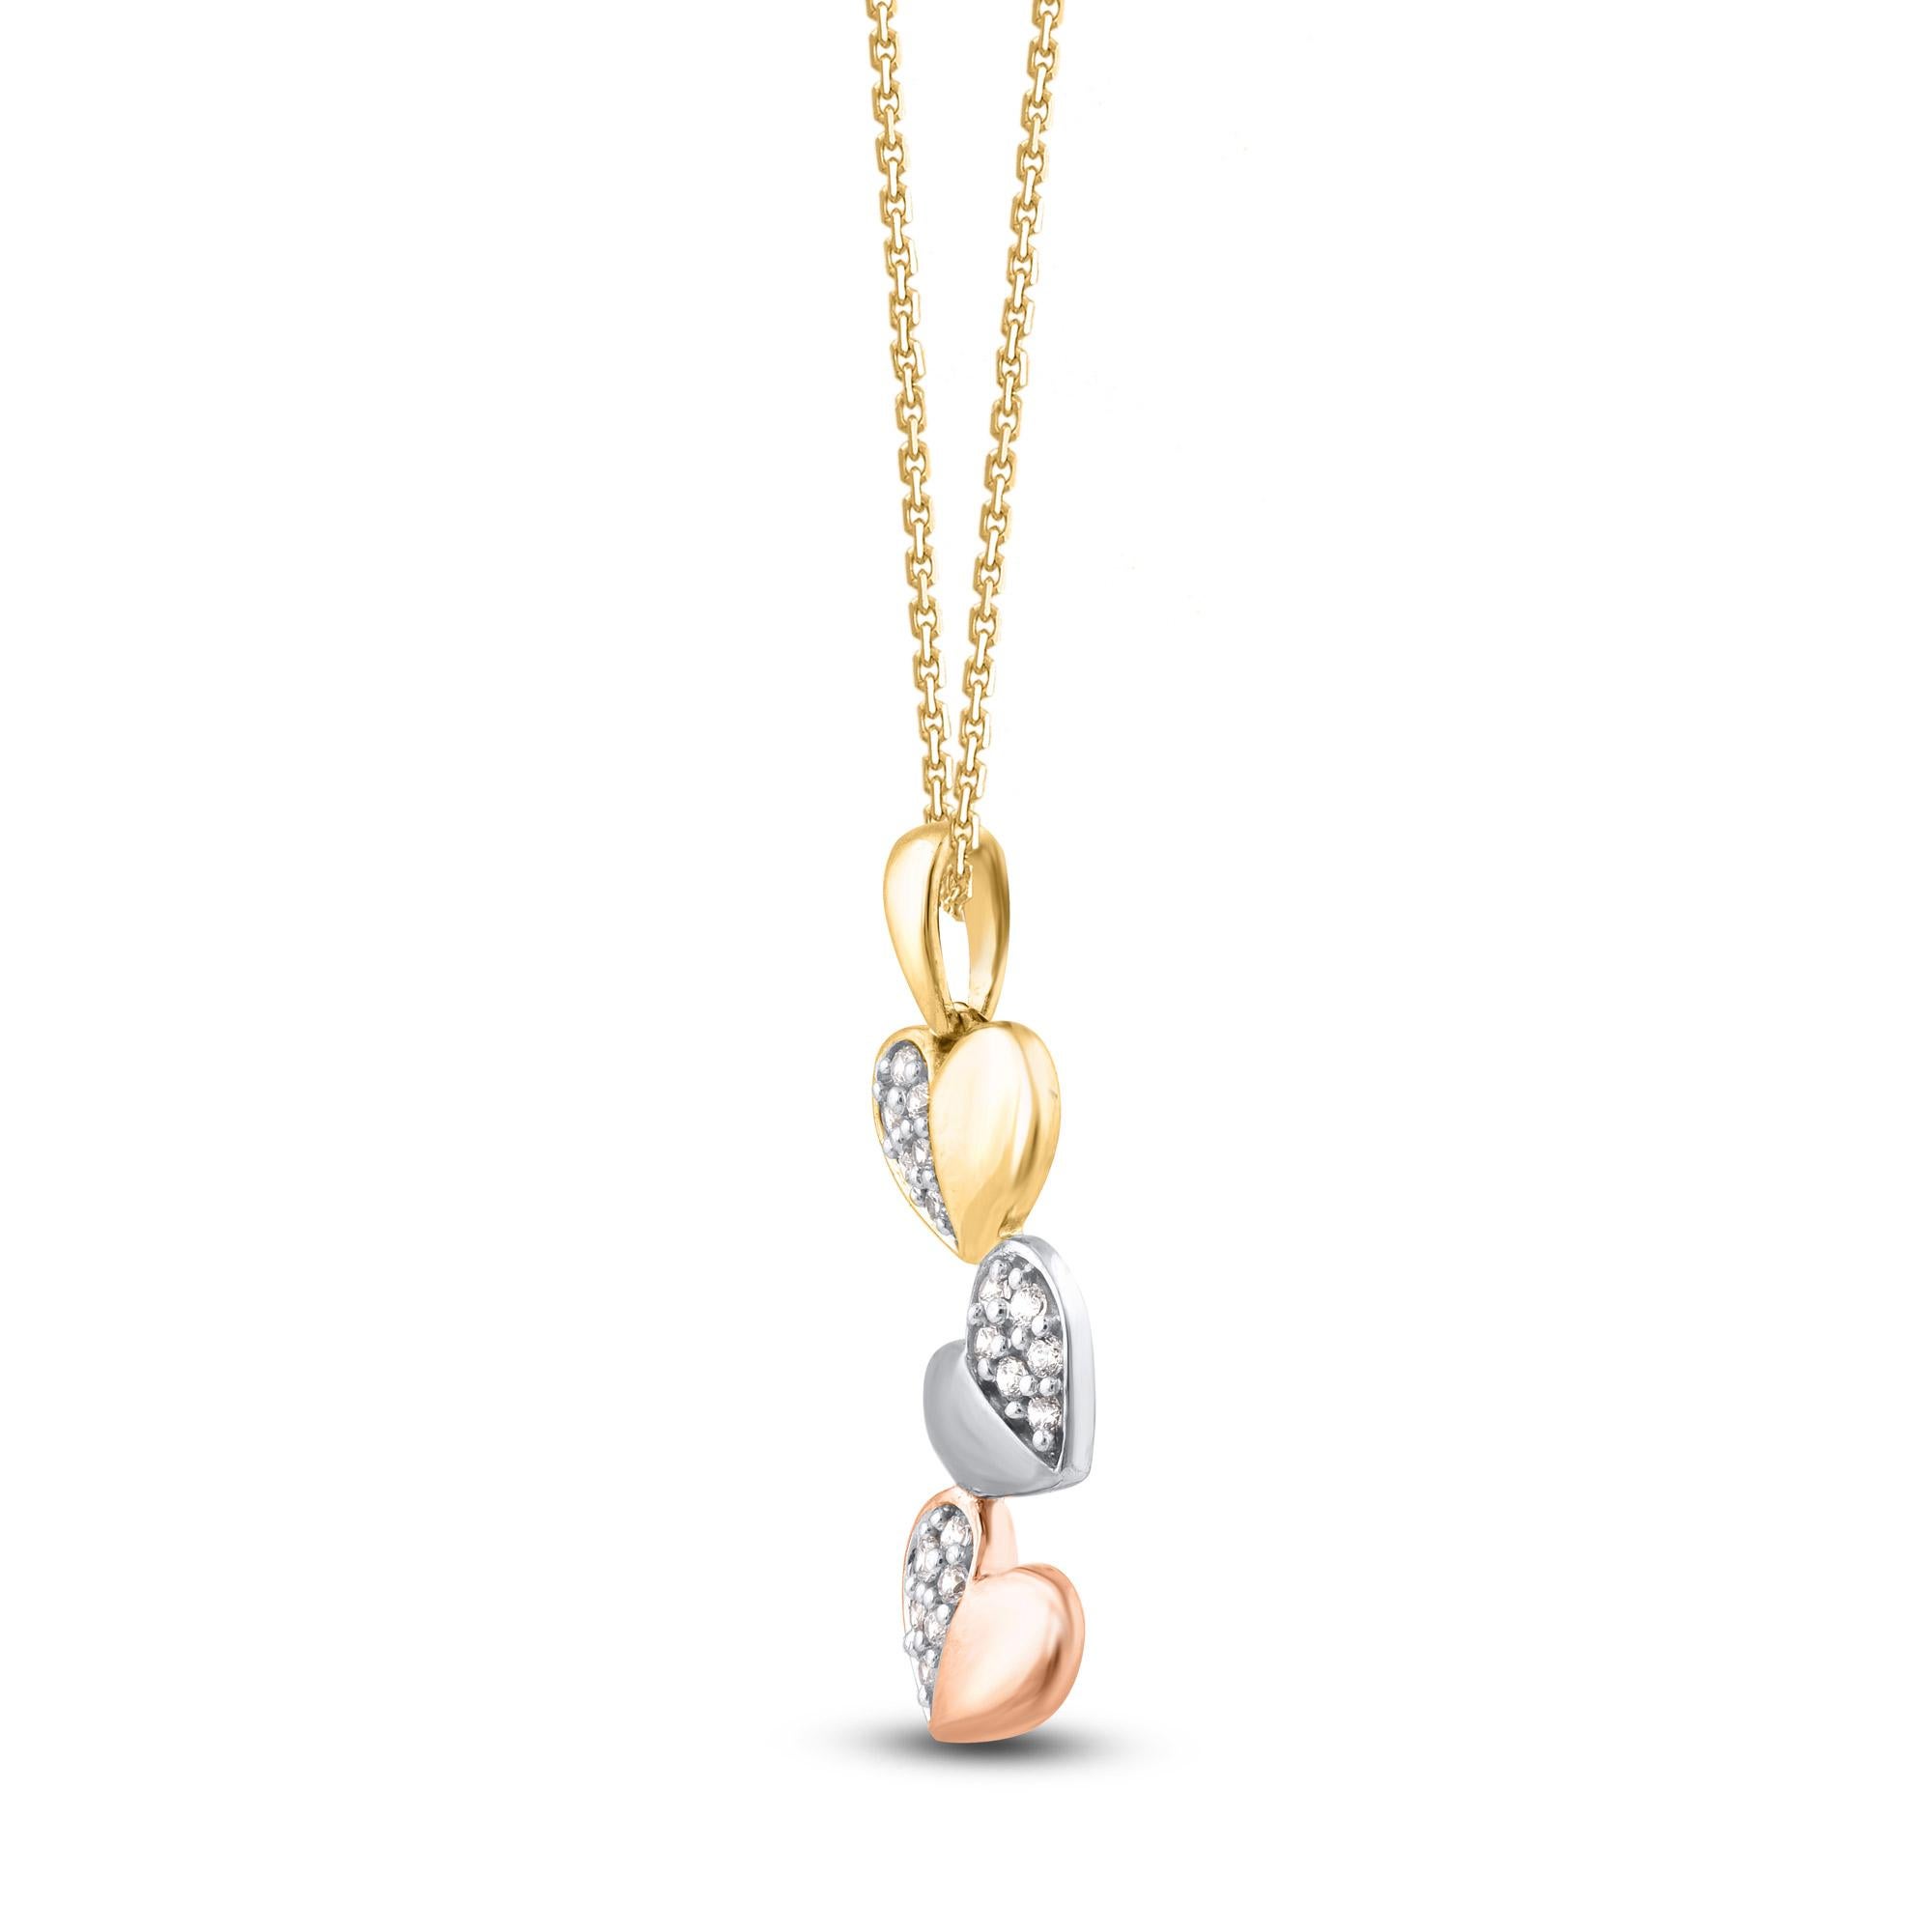 Bring charm to your look with this diamond heart pendant necklace. The pendant is crafted from 14 karat tri color gold and features 18 round brilliant cut diamond set in pave setting and a high polish finish complete the brilliant sophistication of